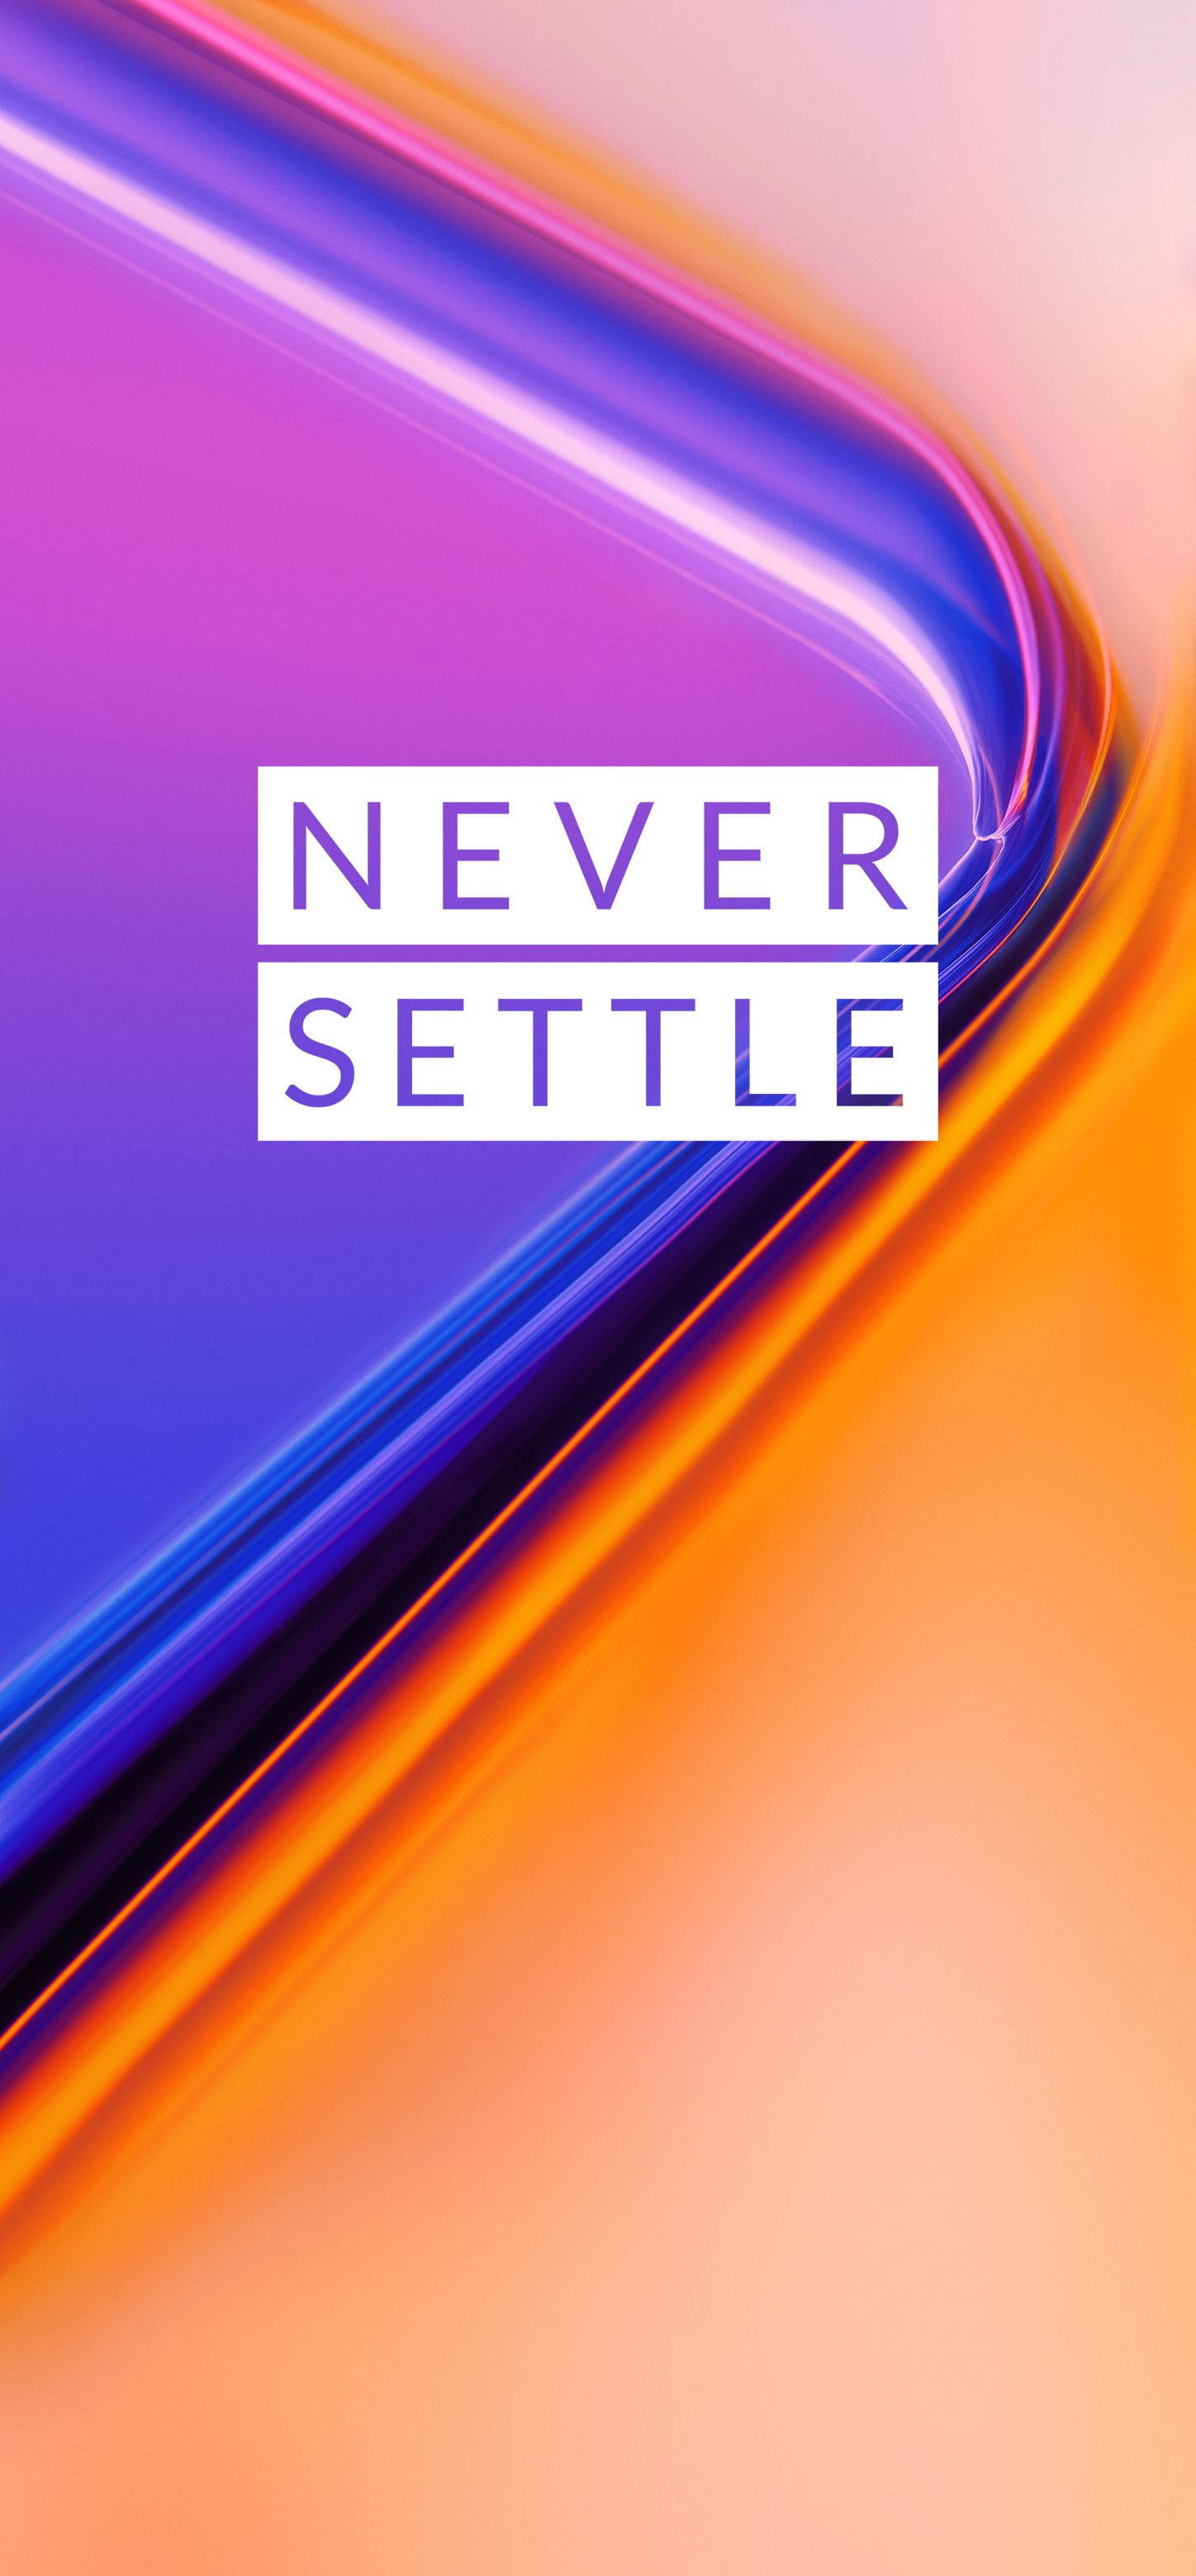 Free Oneplus Wallpaper Downloads, [300+] Oneplus Wallpapers for FREE |  